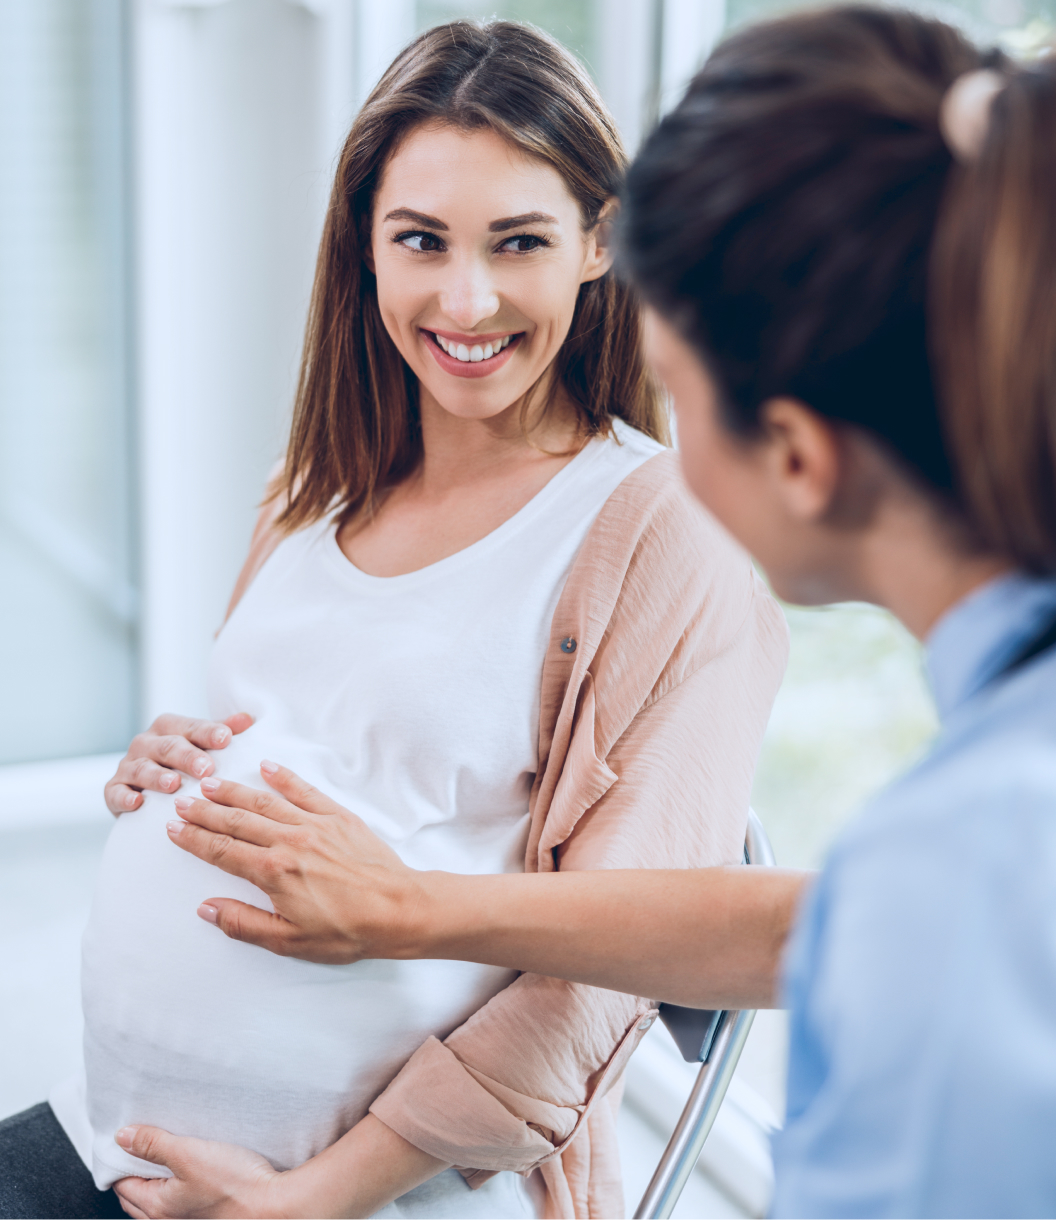 Prenatal chiropractic care for a pregnant woman.